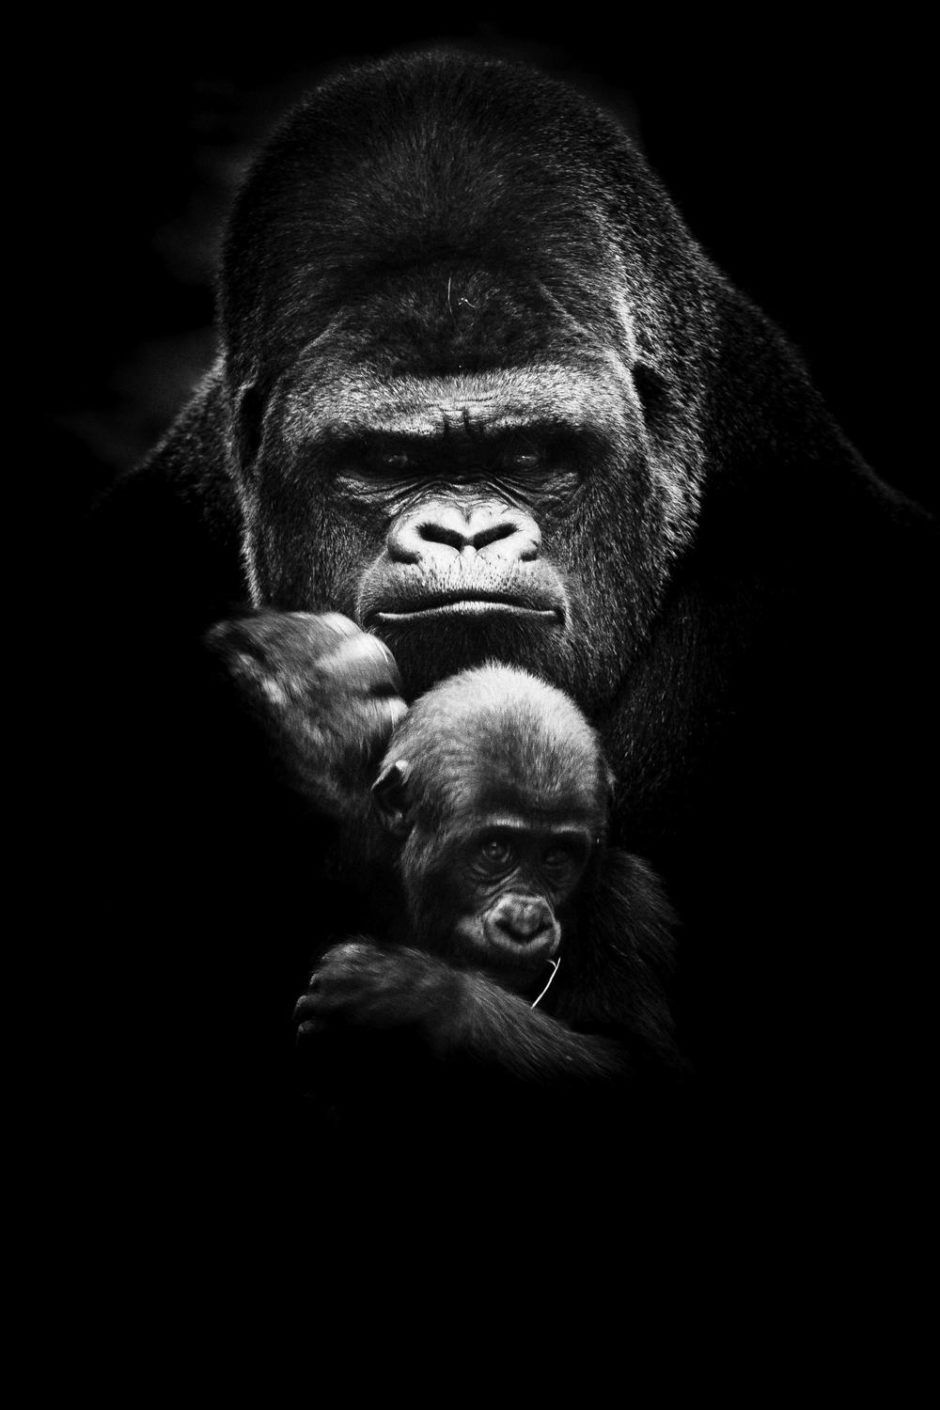 © Frank Belloeil - "Father and Son"